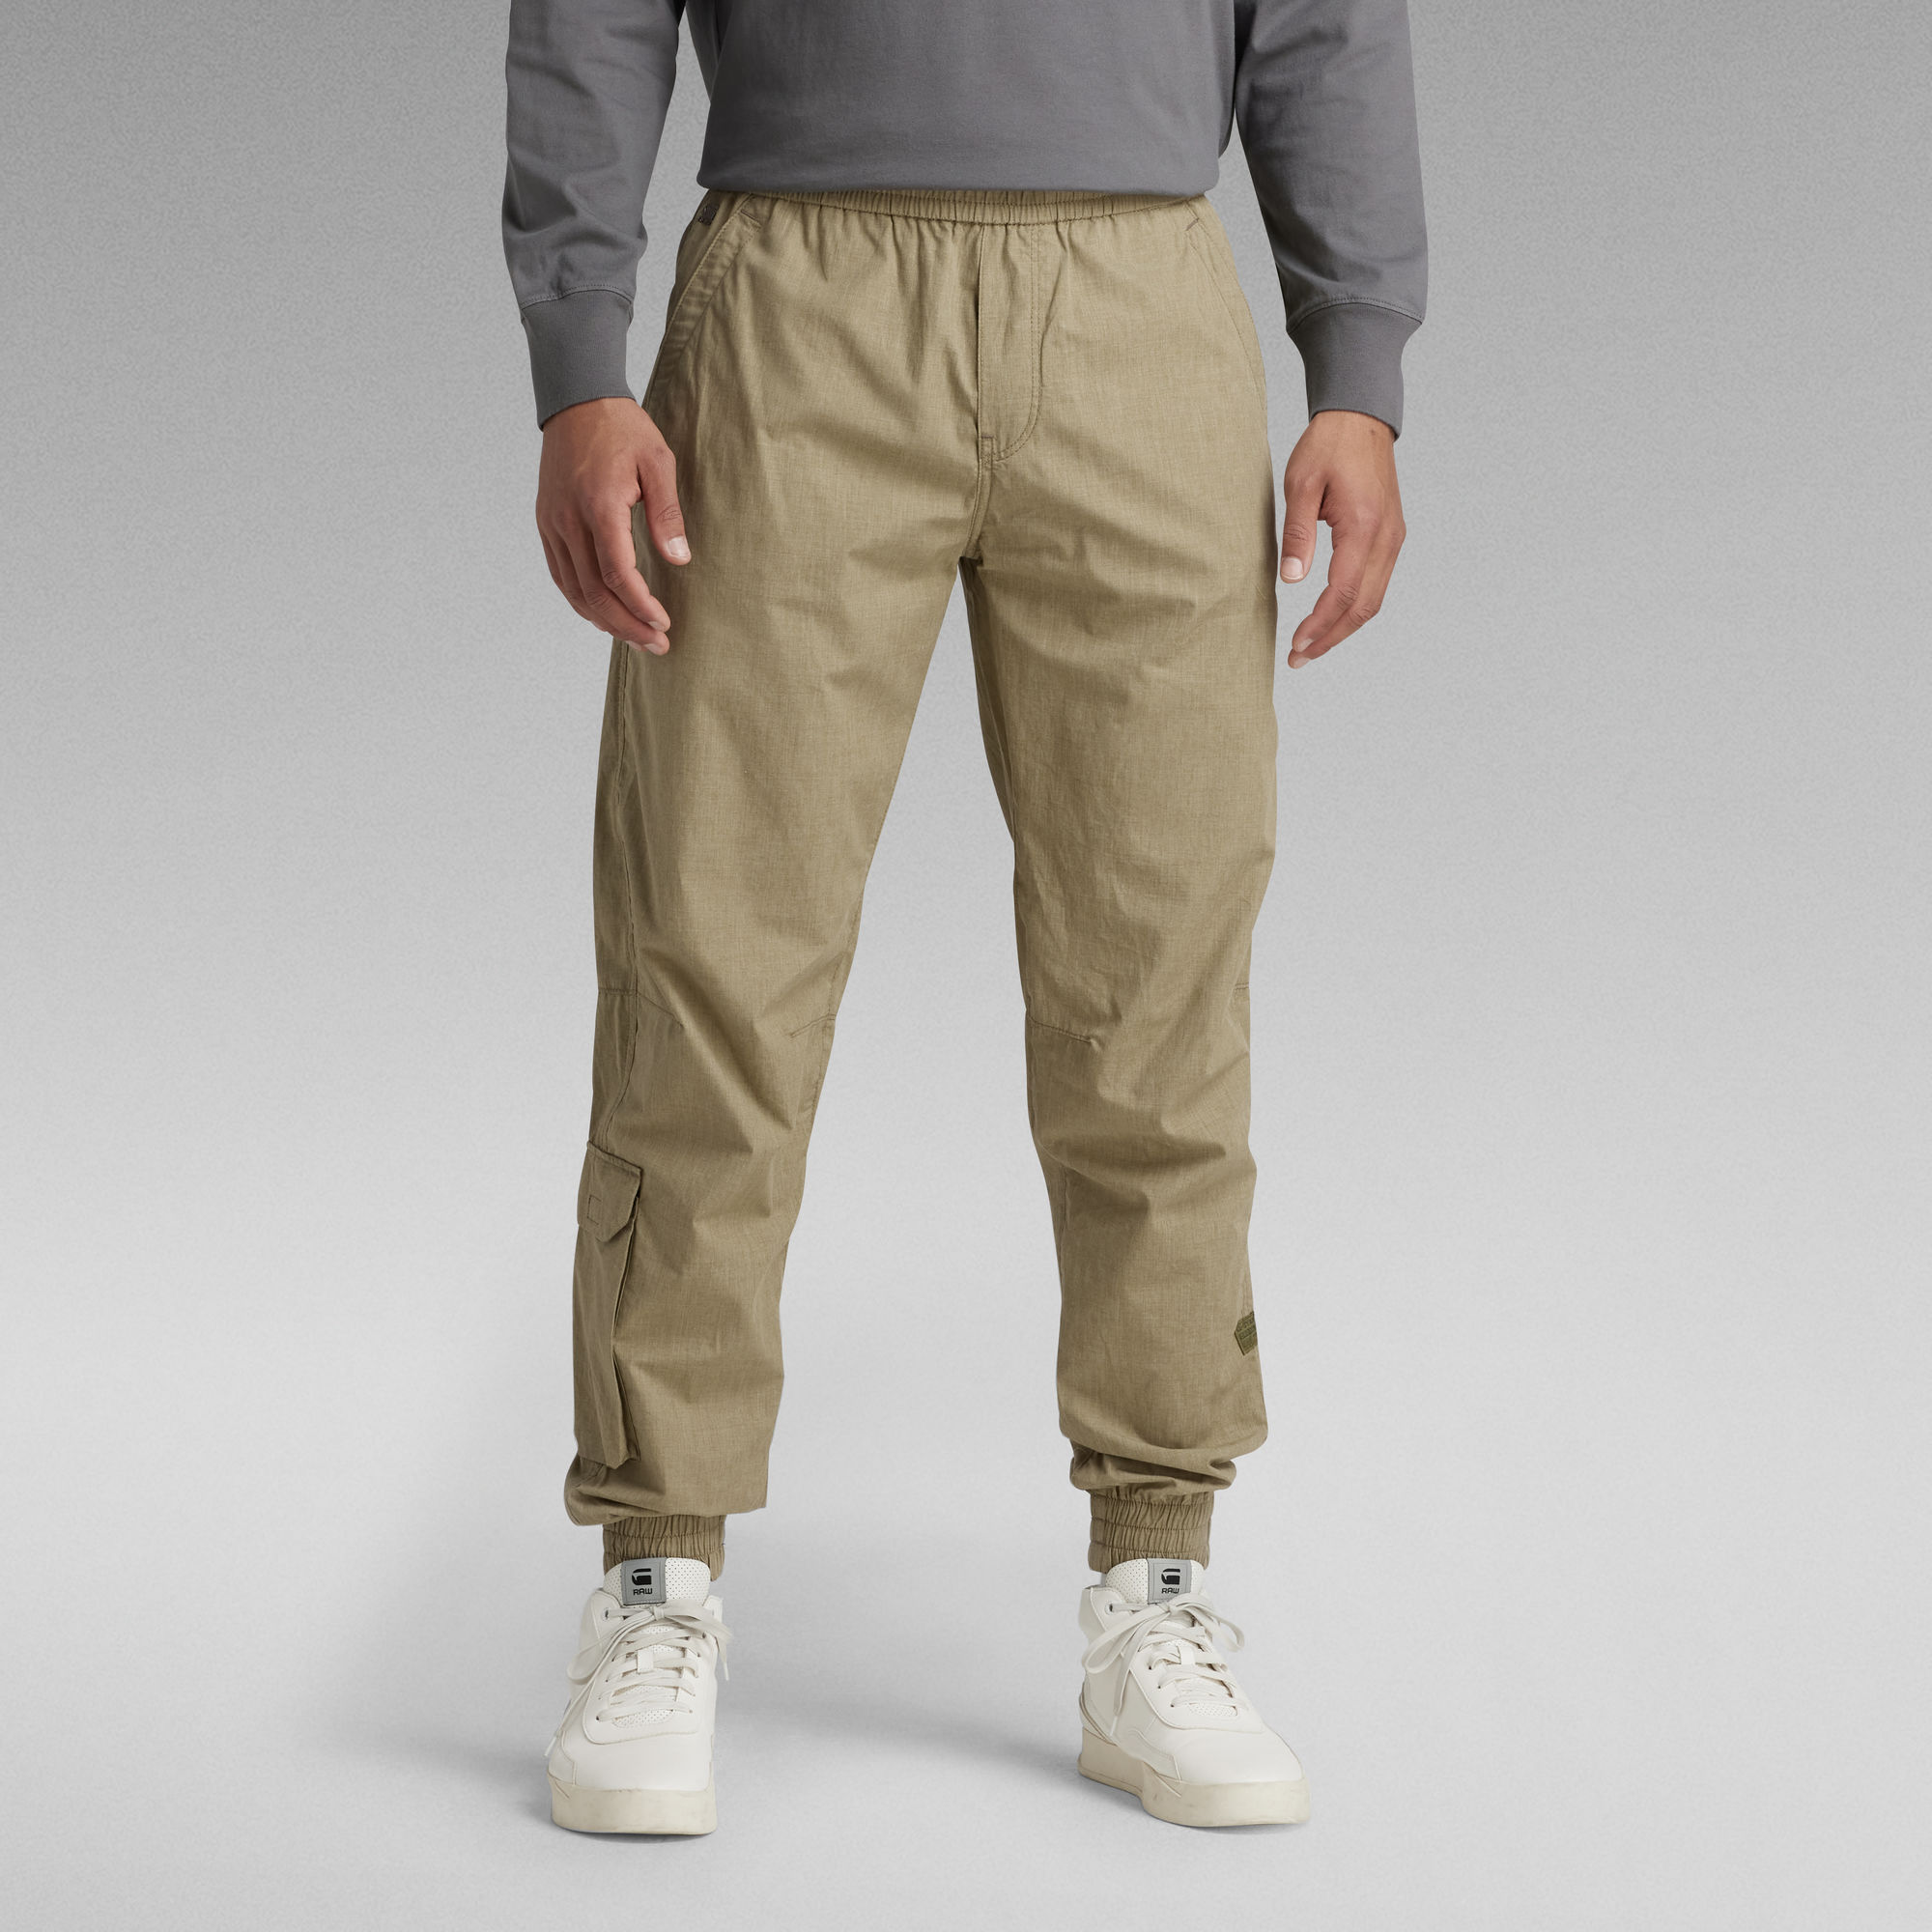 Unisex Chino RCT | Multi color | G-Star RAW®